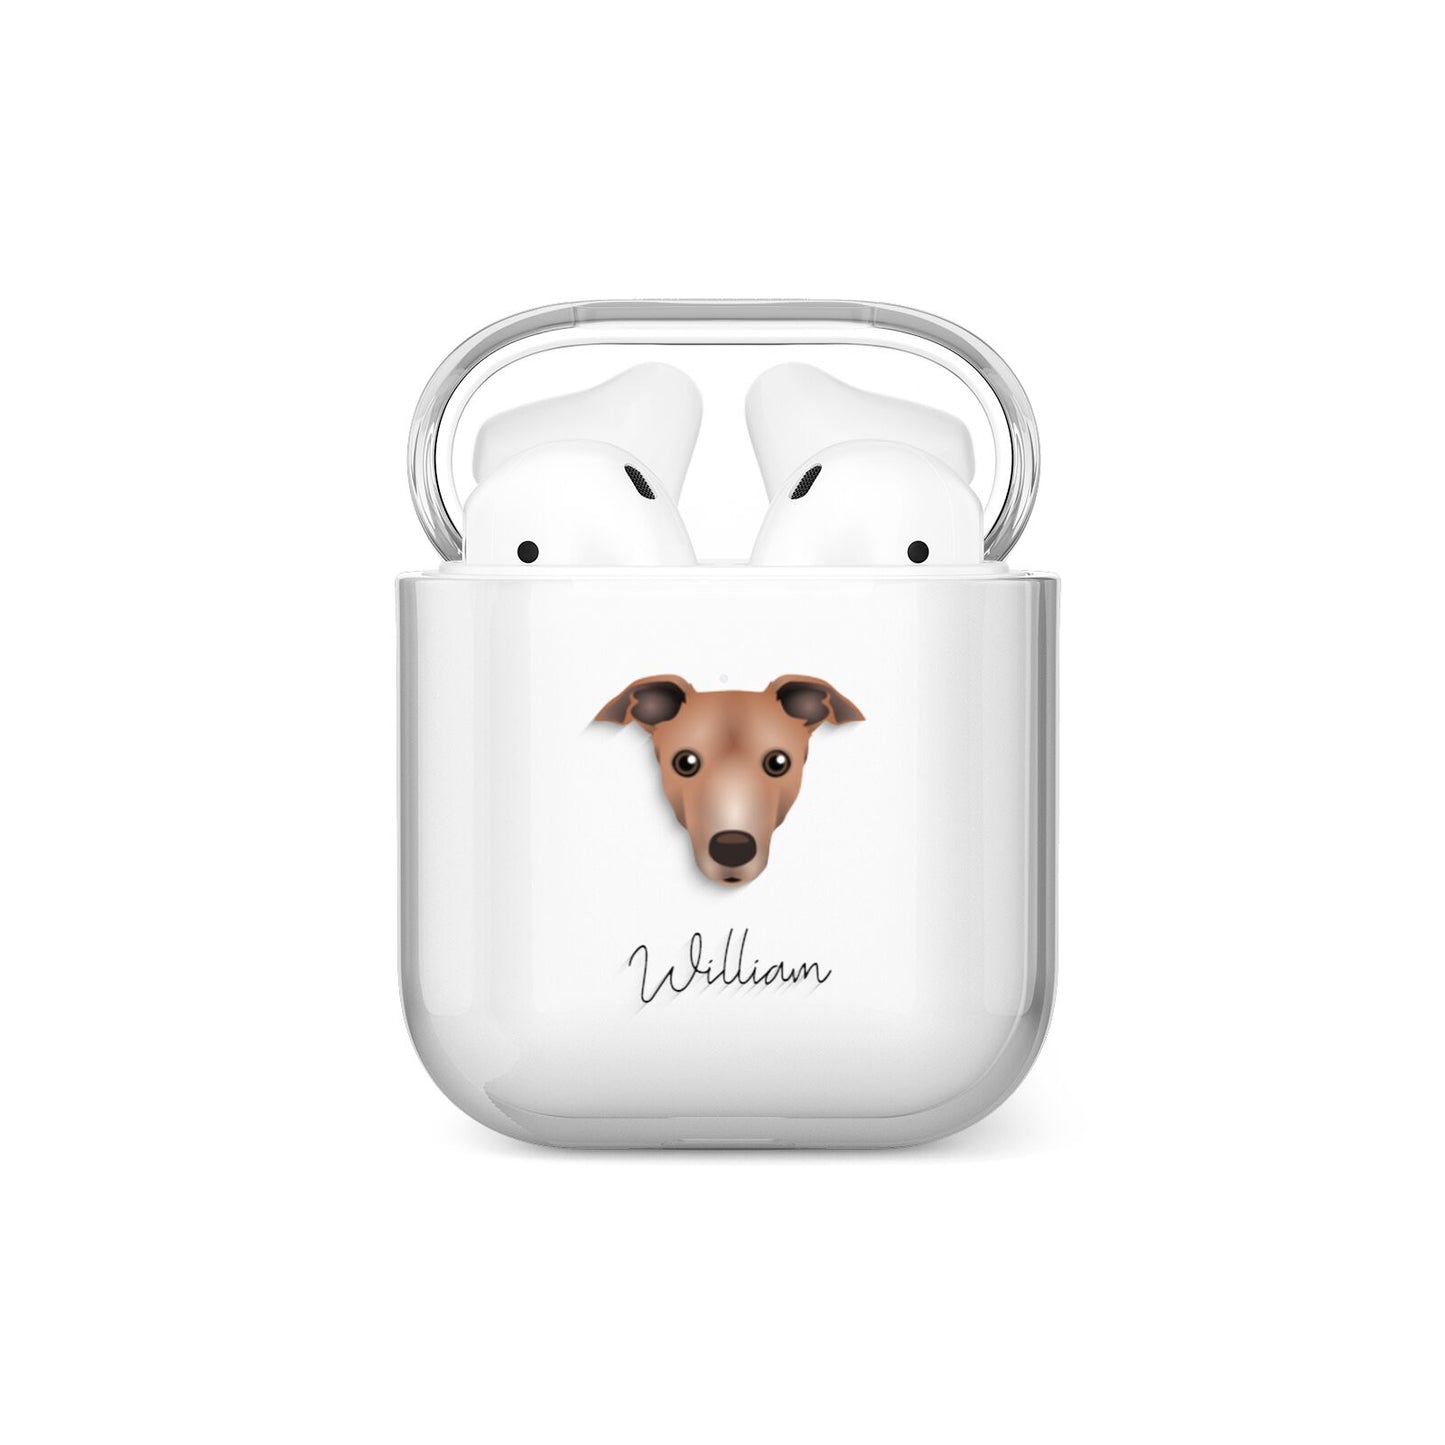 Italian Greyhound Personalised AirPods Case